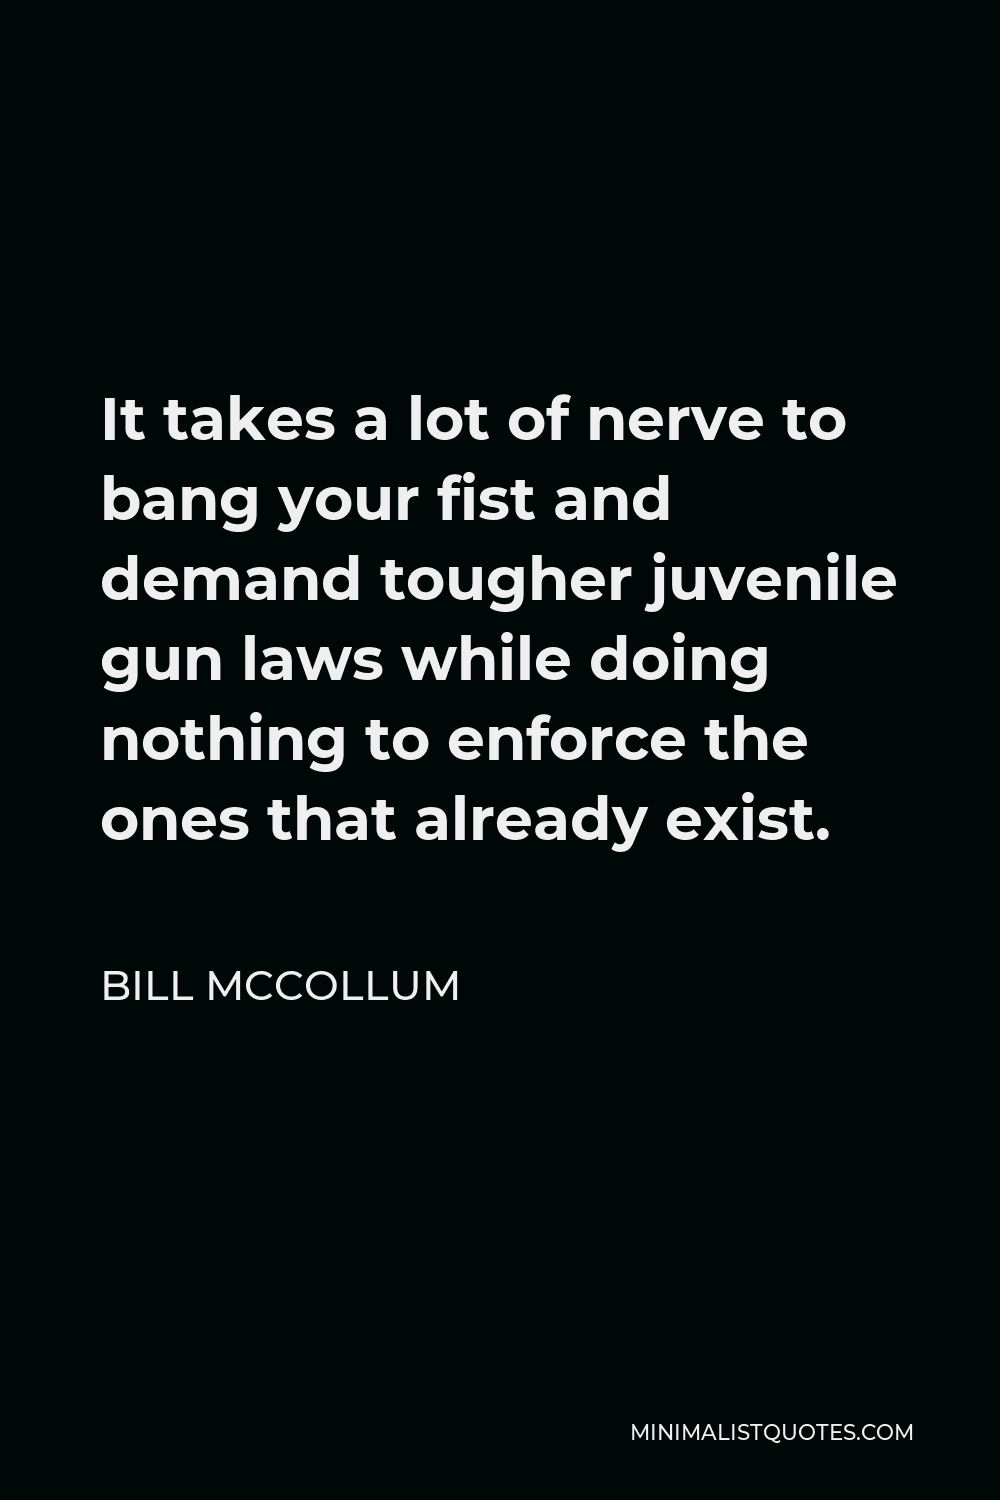 Bill McCollum Quote - It takes a lot of nerve to bang your fist and demand tougher juvenile gun laws while doing nothing to enforce the ones that already exist.